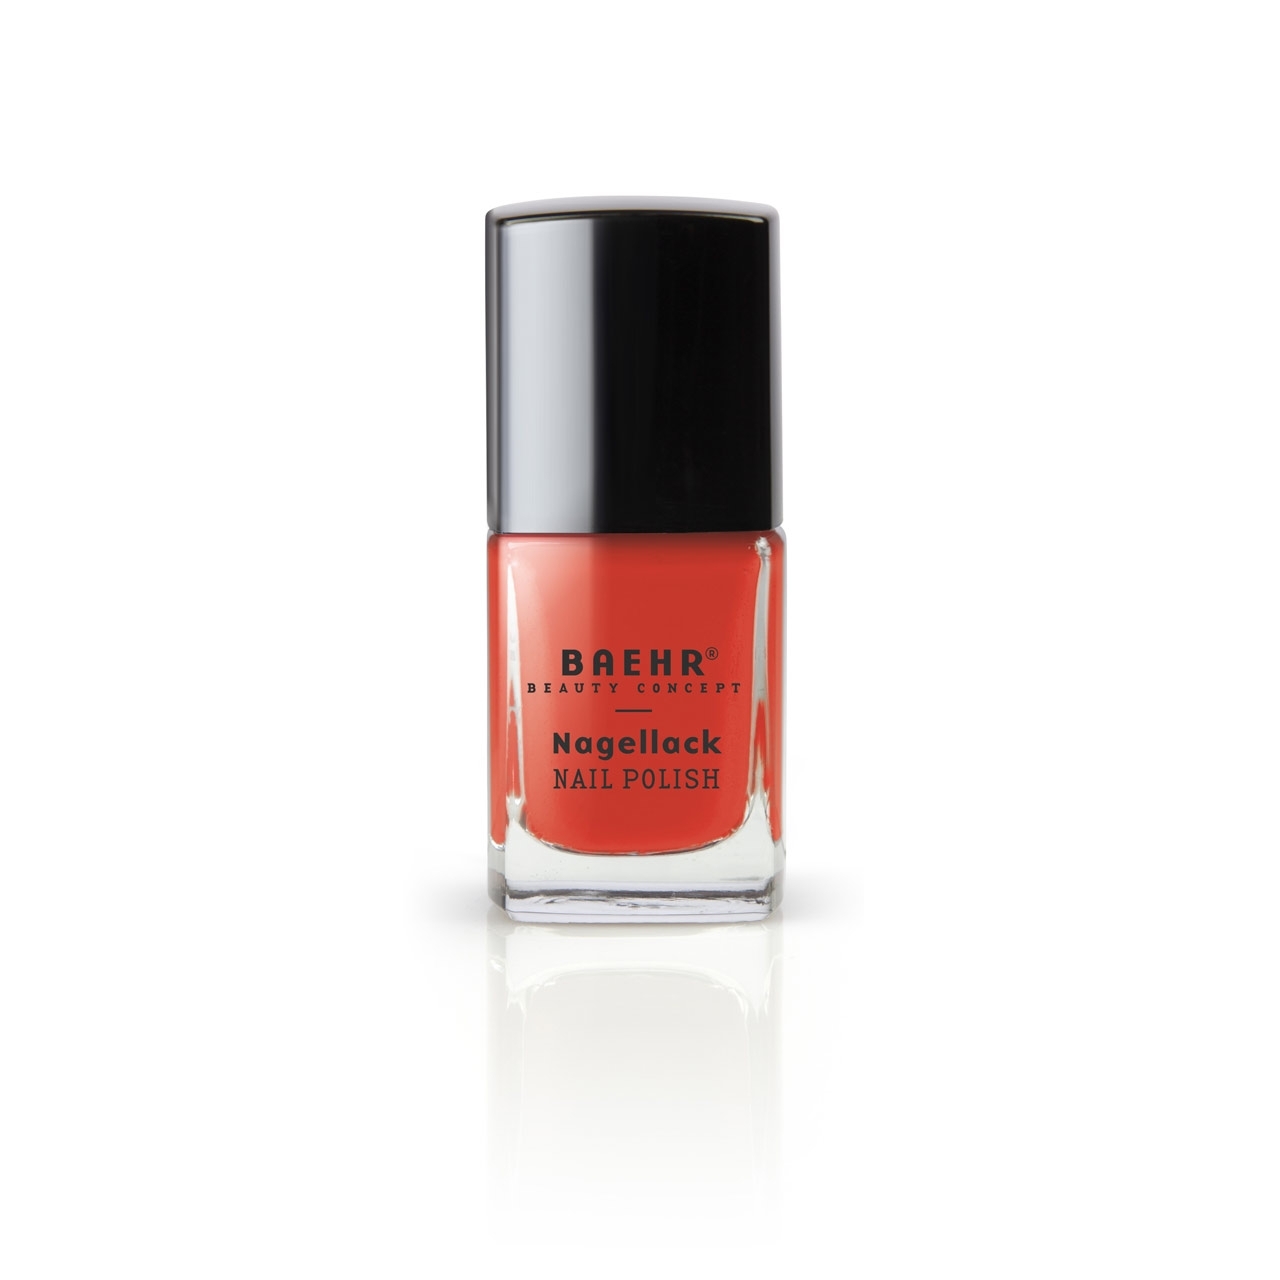 BAEHR BEAUTY CONCEPT - NAILS Nagellack pure red 11 ml